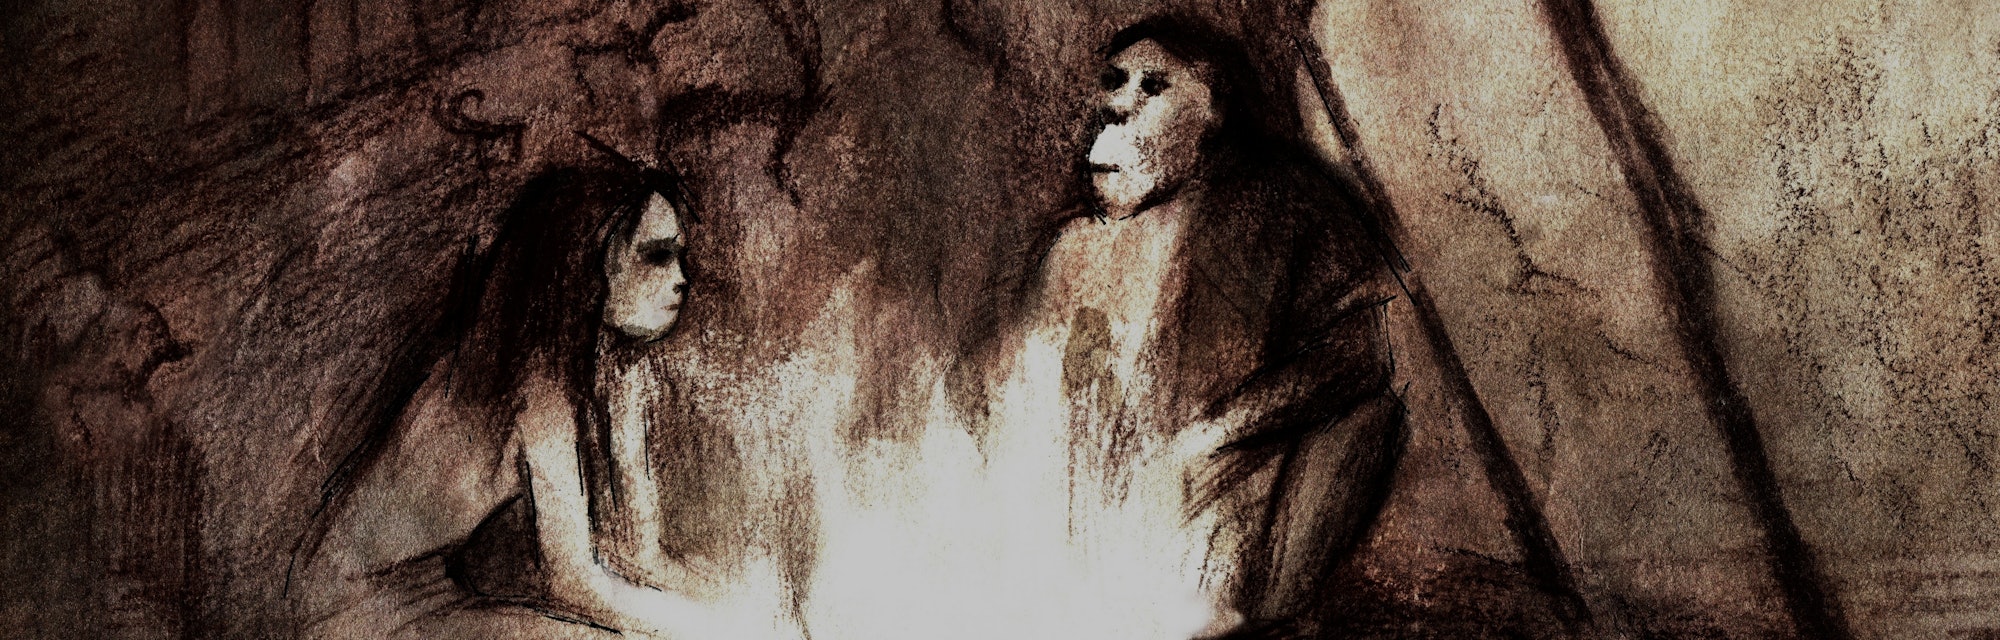 cave people by the fire, Neanderthals in the cave, the original illustration by sepia